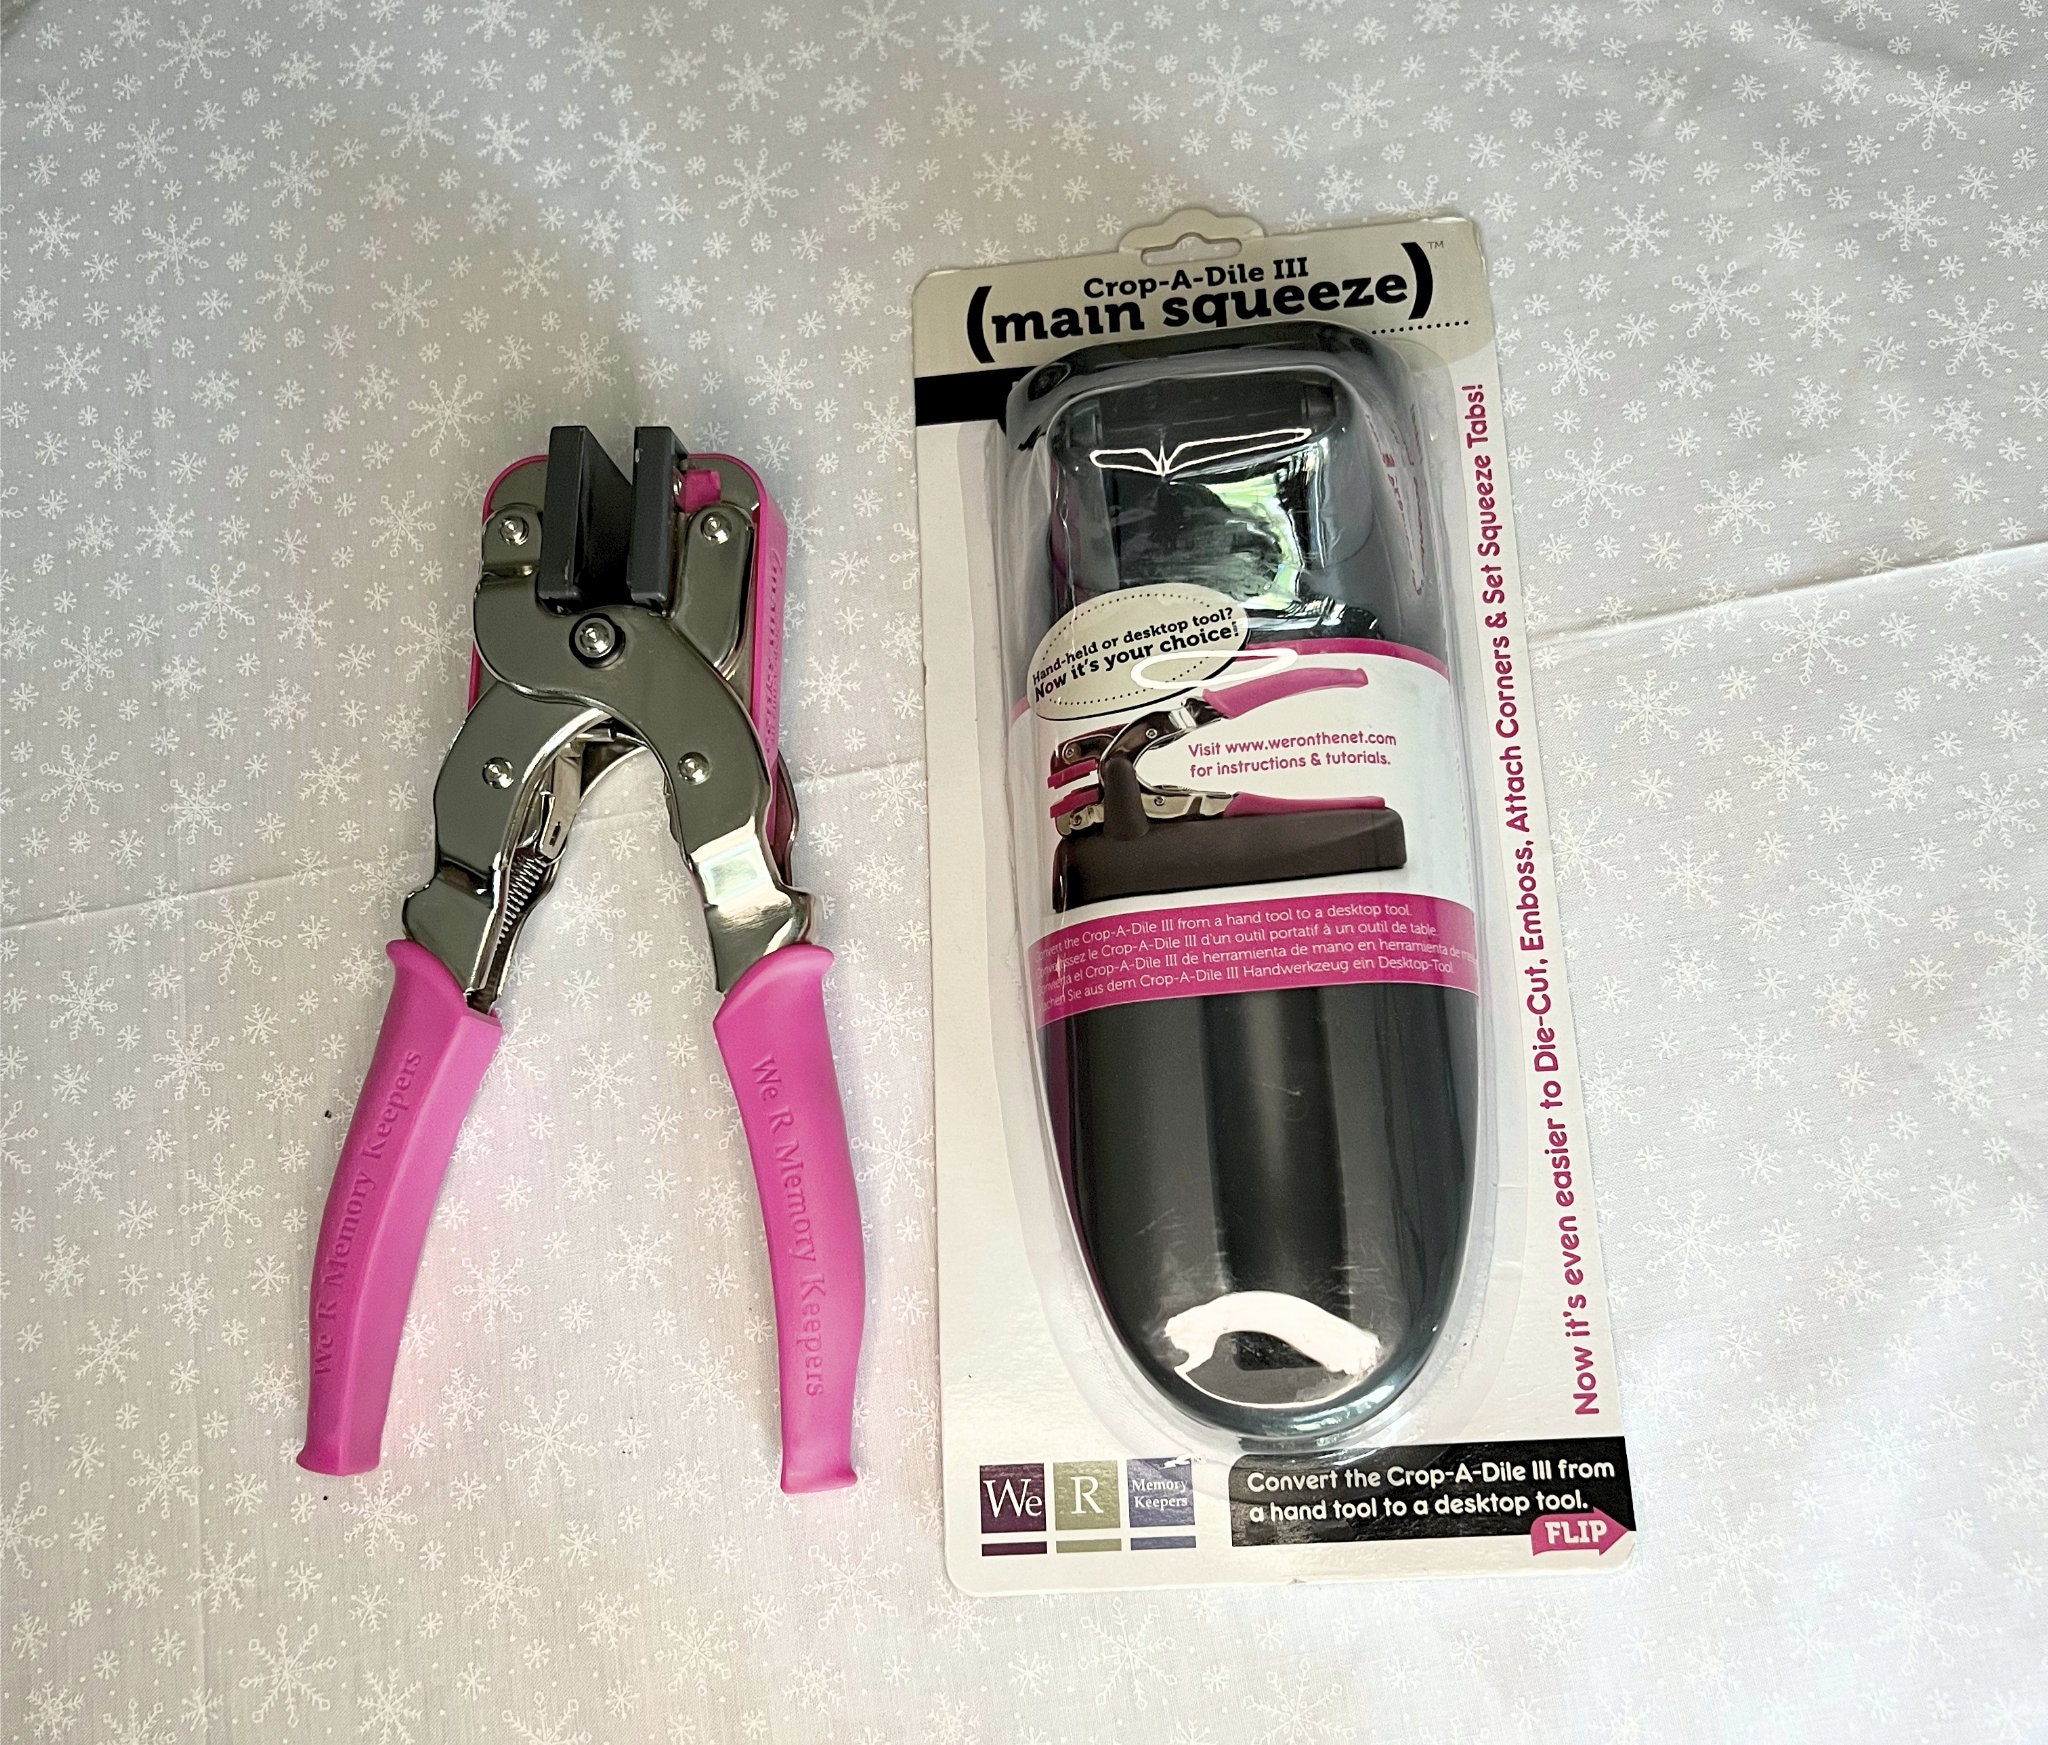 Crop-a-dile III Main Squeeze Tool With Base Included We R Memory